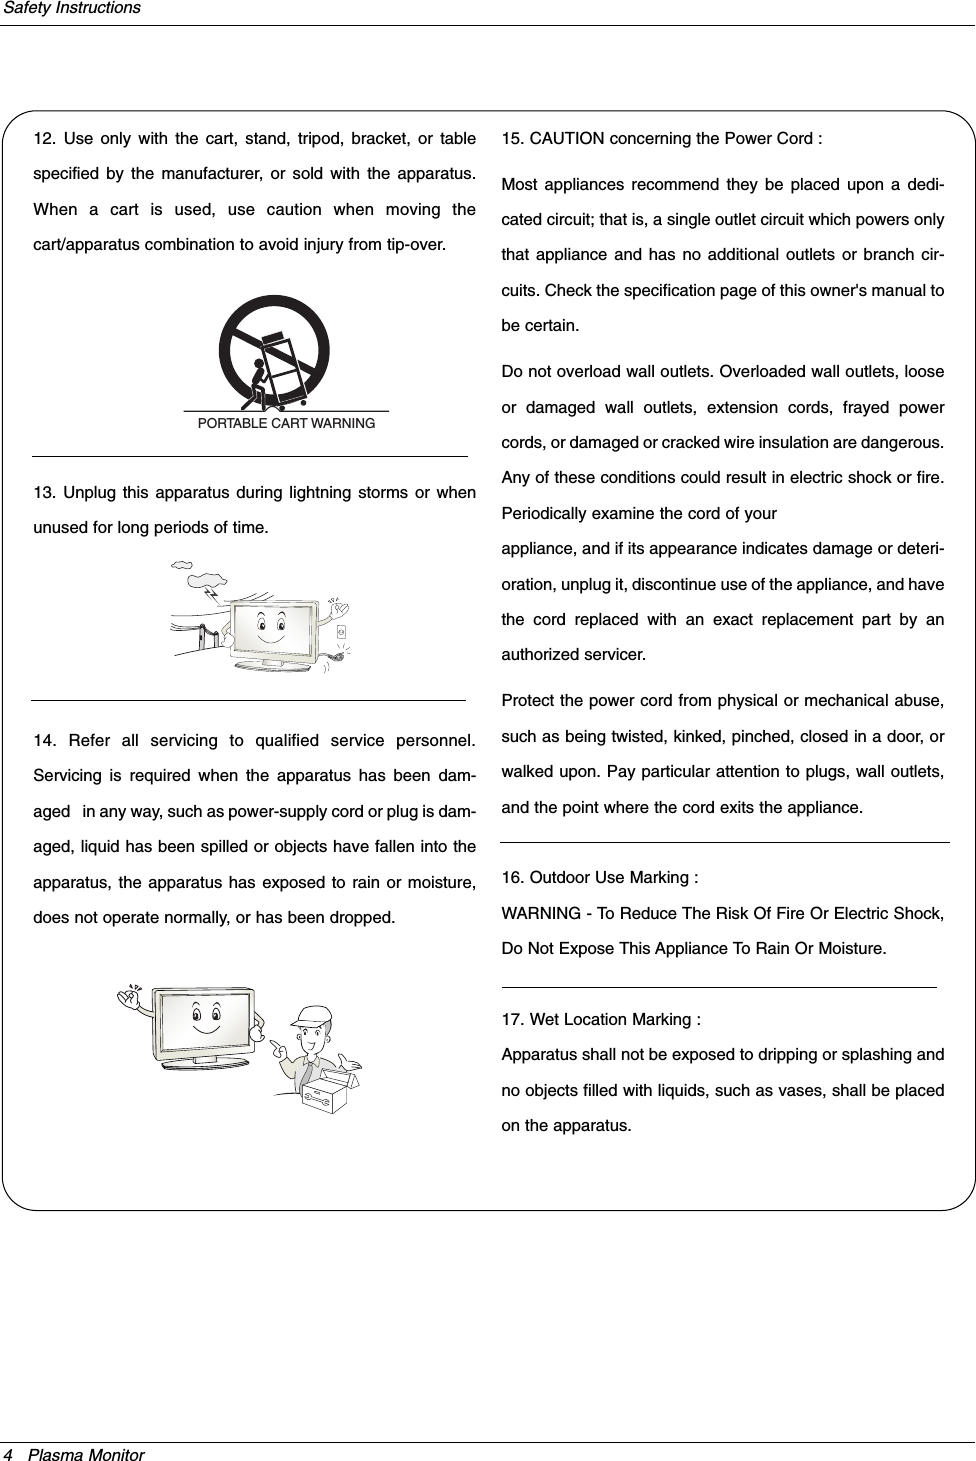 4 Plasma MonitorSafety Instructions12. Use only with the cart, stand, tripod, bracket, or tablespecified by the manufacturer, or sold with the apparatus.When a cart is used, use caution when moving thecart/apparatus combination to avoid injury from tip-over.13. Unplug this apparatus during lightning storms or whenunused for long periods of time.14. Refer all servicing to qualified service personnel.Servicing is required when the apparatus has been dam-aged   in any way, such as power-supply cord or plug is dam-aged, liquid has been spilled or objects have fallen into theapparatus, the apparatus has exposed to rain or moisture,does not operate normally, or has been dropped.15. CAUTION concerning the Power Cord :Most appliances recommend they be placed upon a dedi-cated circuit; that is, a single outlet circuit which powers onlythat appliance and has no additional outlets or branch cir-cuits. Check the specification page of this owner&apos;s manual tobe certain.Do not overload wall outlets. Overloaded wall outlets, looseor damaged wall outlets, extension cords, frayed powercords, or damaged or cracked wire insulation are dangerous.Any of these conditions could result in electric shock or fire.Periodically examine the cord of yourappliance, and if its appearance indicates damage or deteri-oration, unplug it, discontinue use of the appliance, and havethe cord replaced with an exact replacement part by anauthorized servicer.Protect the power cord from physical or mechanical abuse,such as being twisted, kinked, pinched, closed in a door, orwalked upon. Pay particular attention to plugs, wall outlets,and the point where the cord exits the appliance.16. Outdoor Use Marking :WARNING - To Reduce The Risk Of Fire Or Electric Shock,Do Not Expose This Appliance To Rain Or Moisture.17. Wet Location Marking :Apparatus shall not be exposed to dripping or splashing andno objects filled with liquids, such as vases, shall be placedon the apparatus.PORTABLE CART WARNING